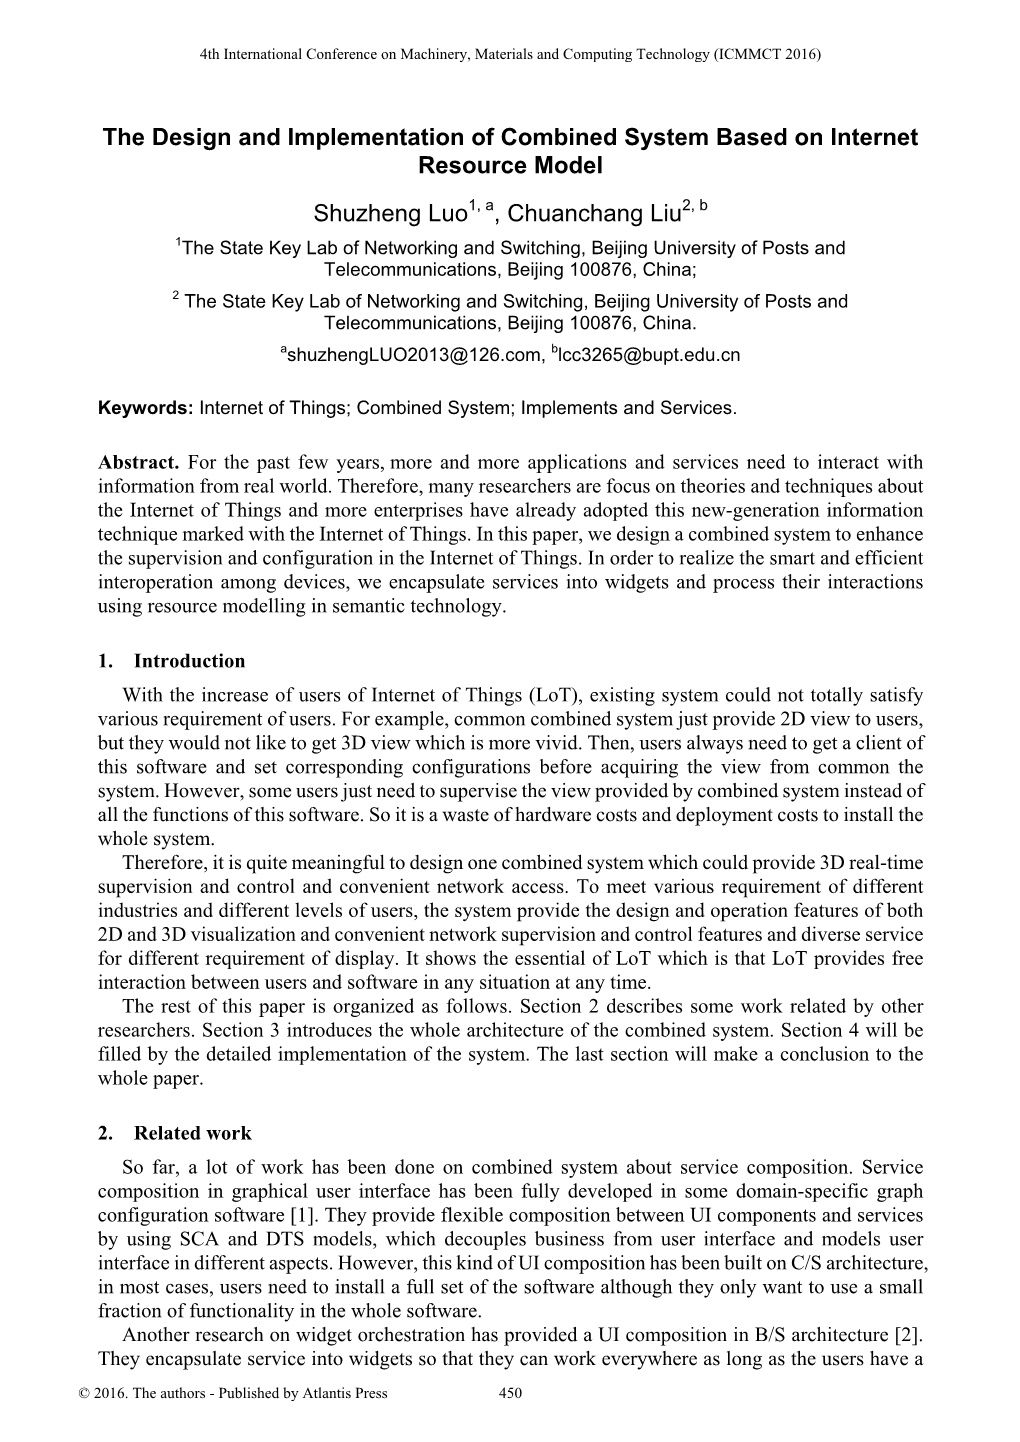 The Design and Implementation of Combined System Based on Internet Resource Model Shuzheng